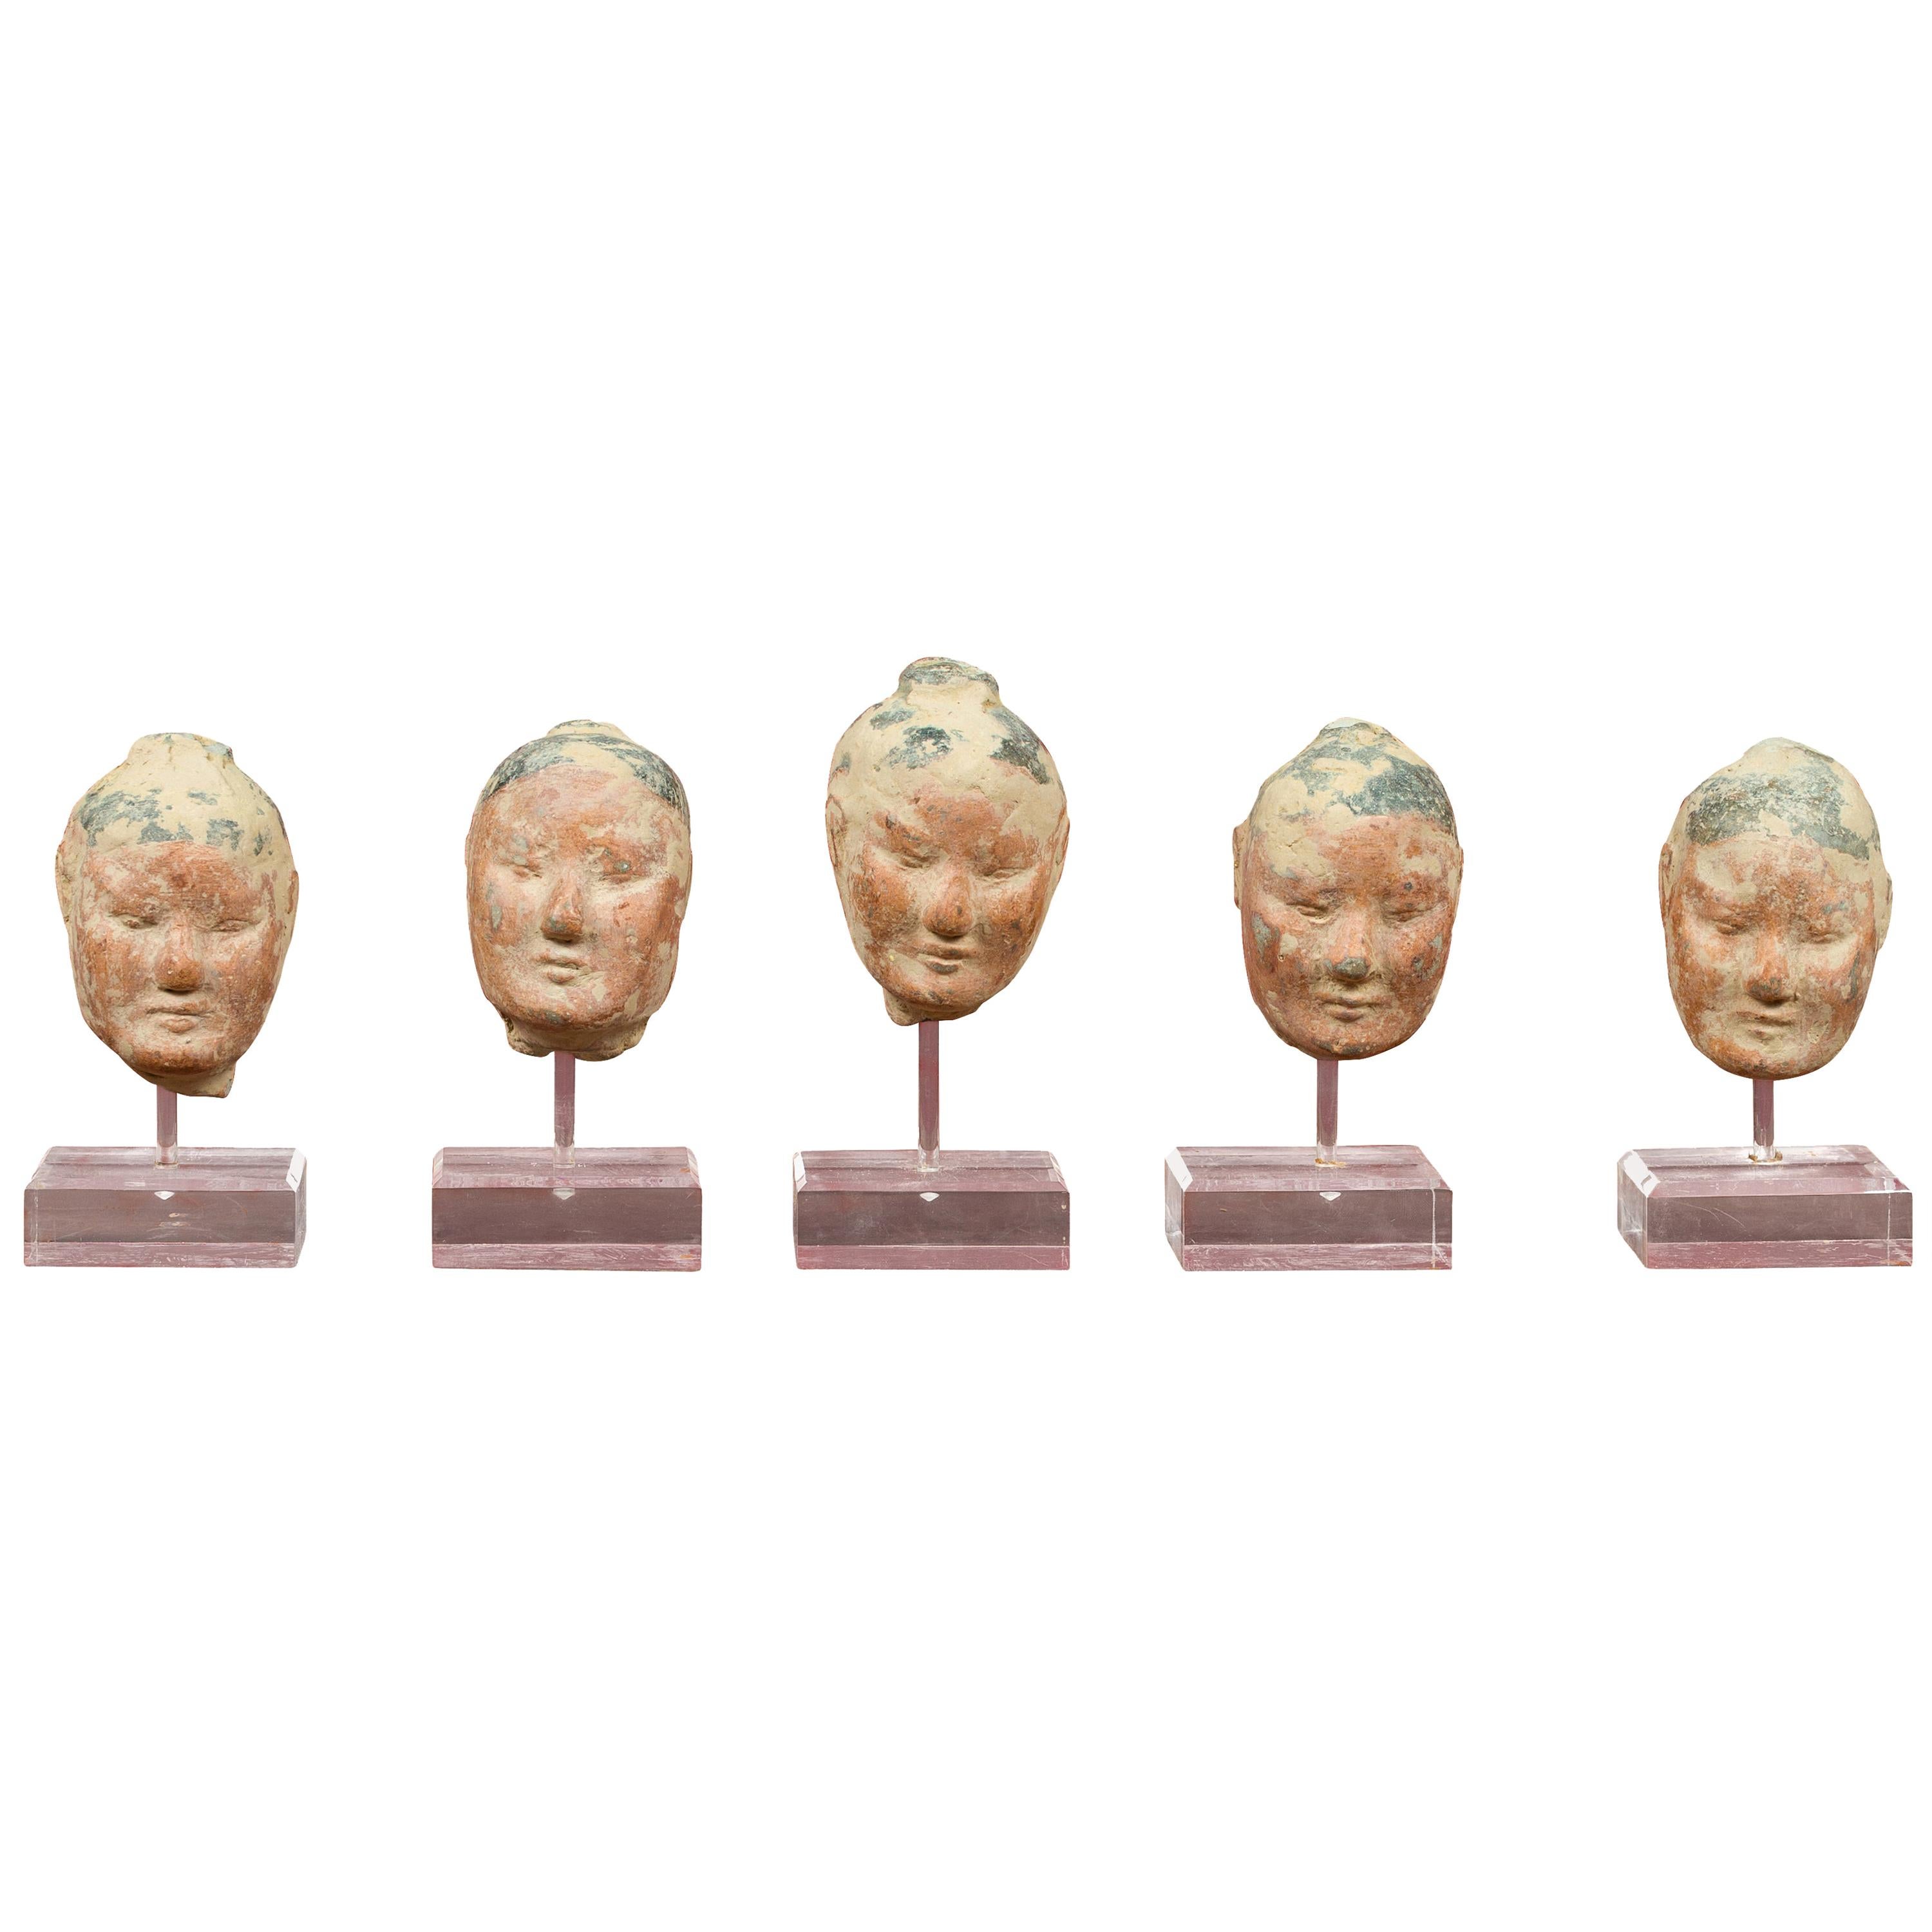 Set of Five Chinese Han Dynasty Terracotta Heads with Original Paint on Lucite